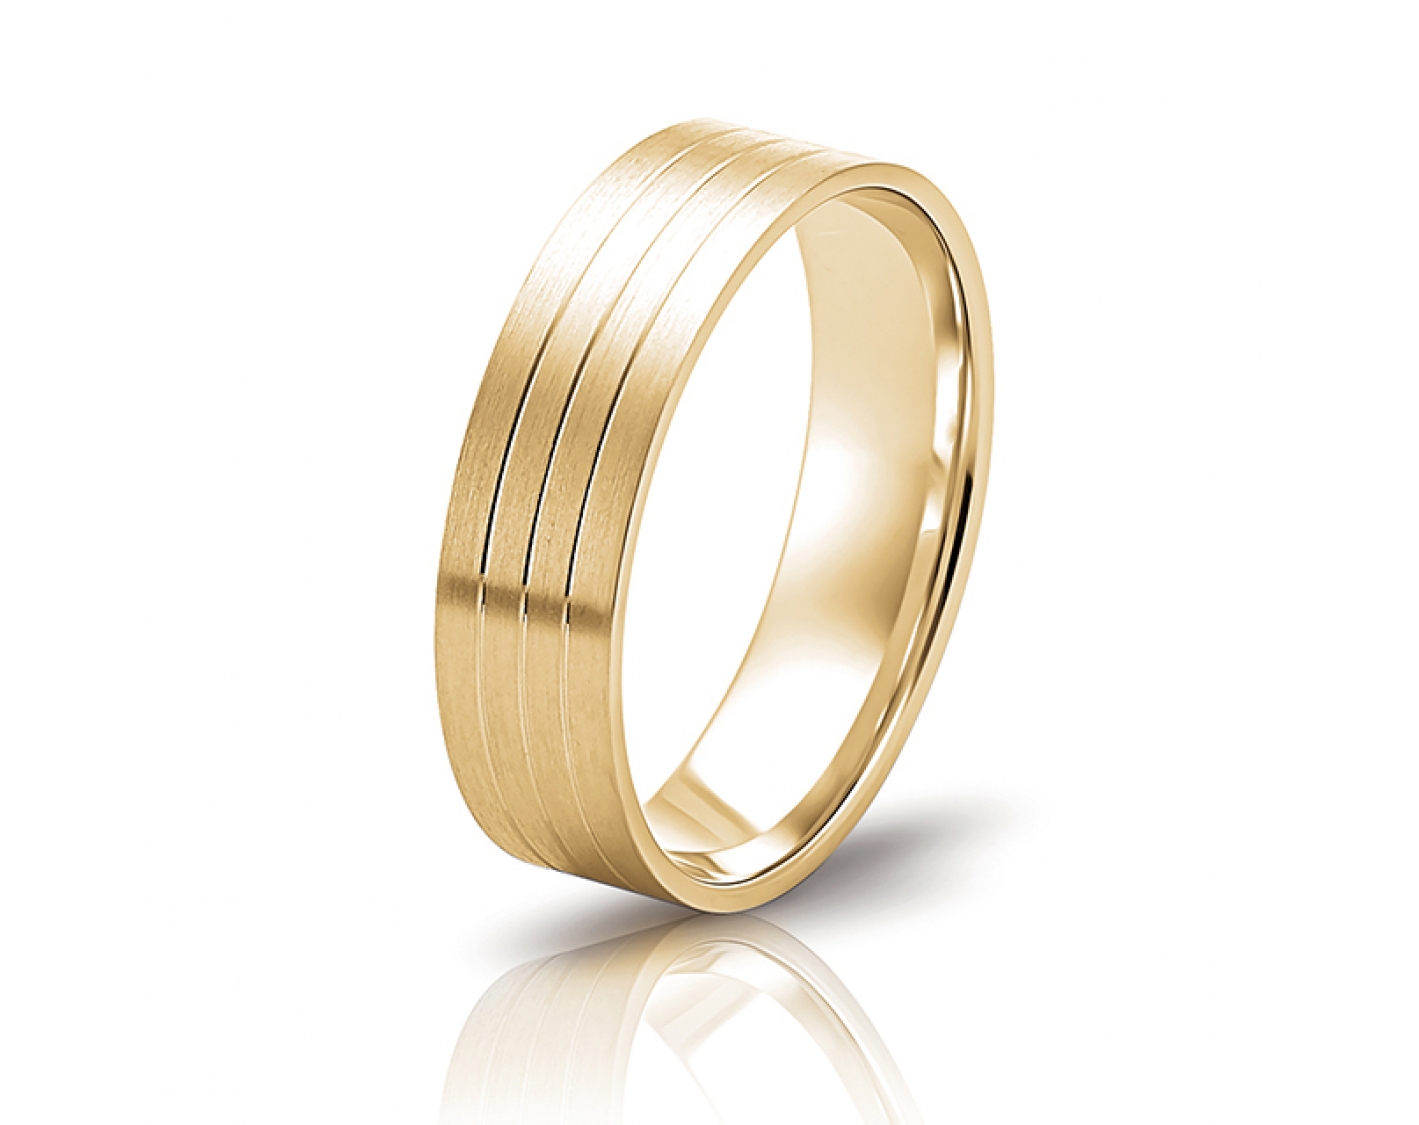 18k rose gold 6mm matte wedding band with inlays Photos & images